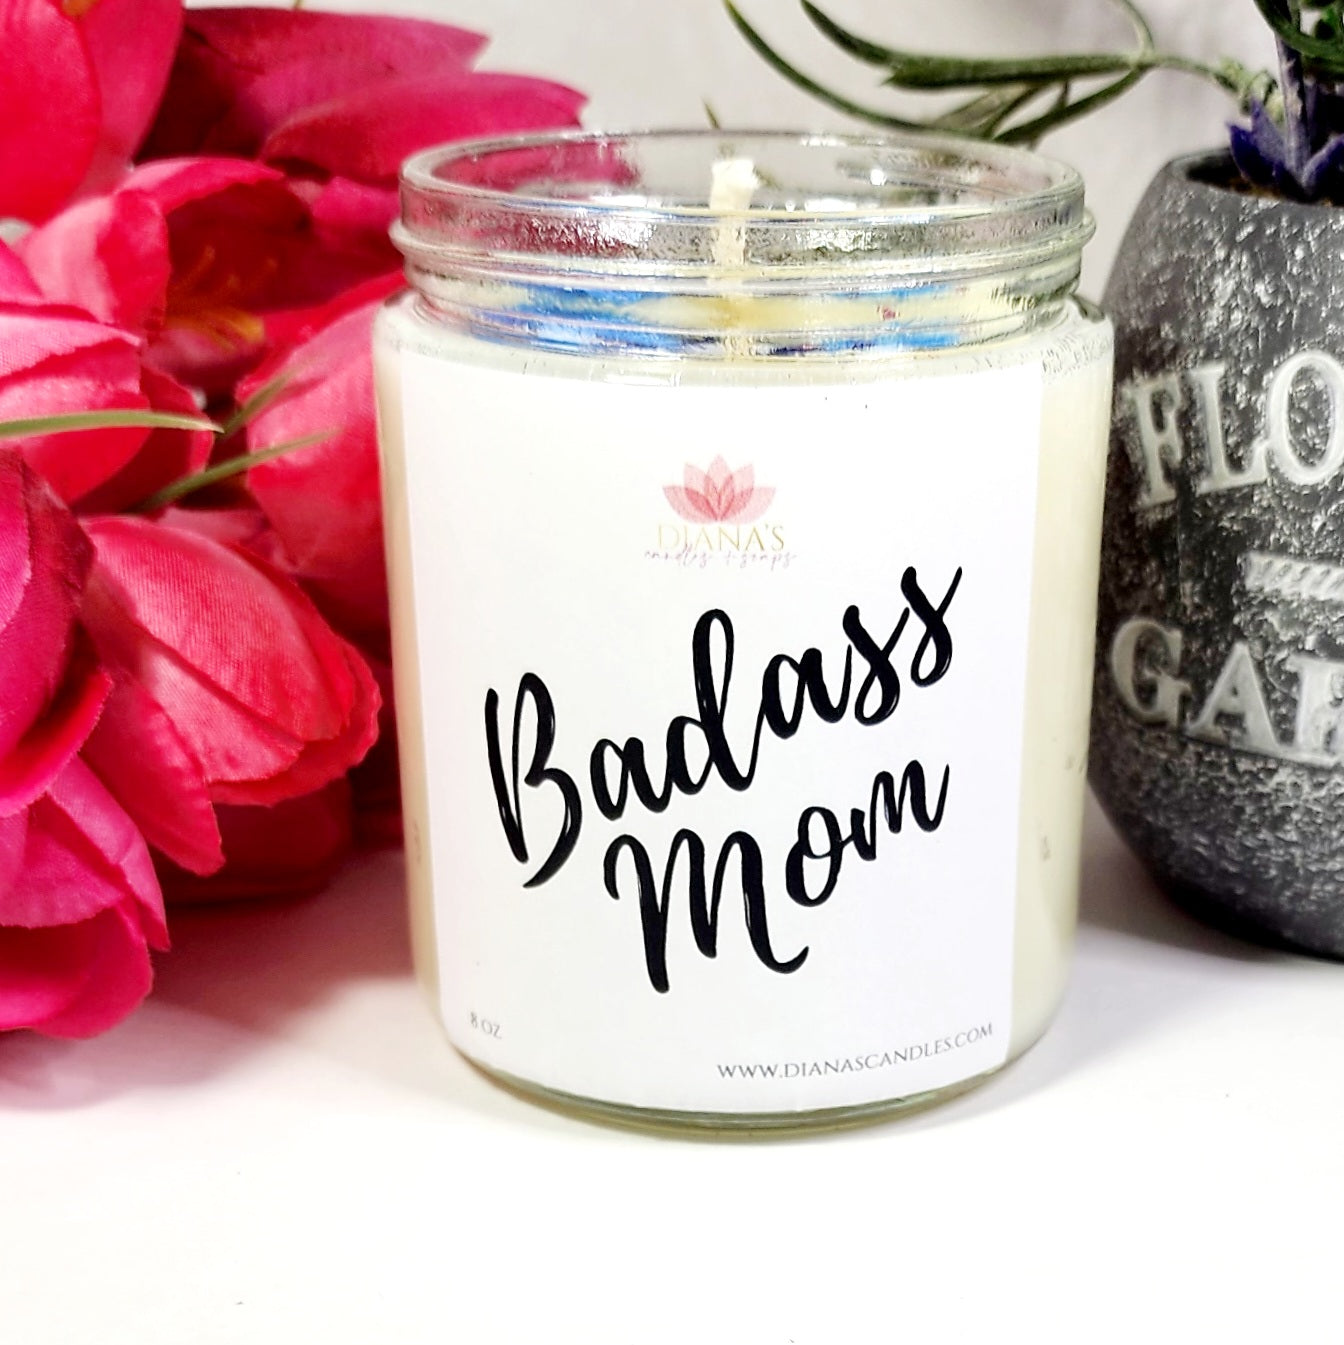 Badass Mom Candle Diana's Candles and Soaps